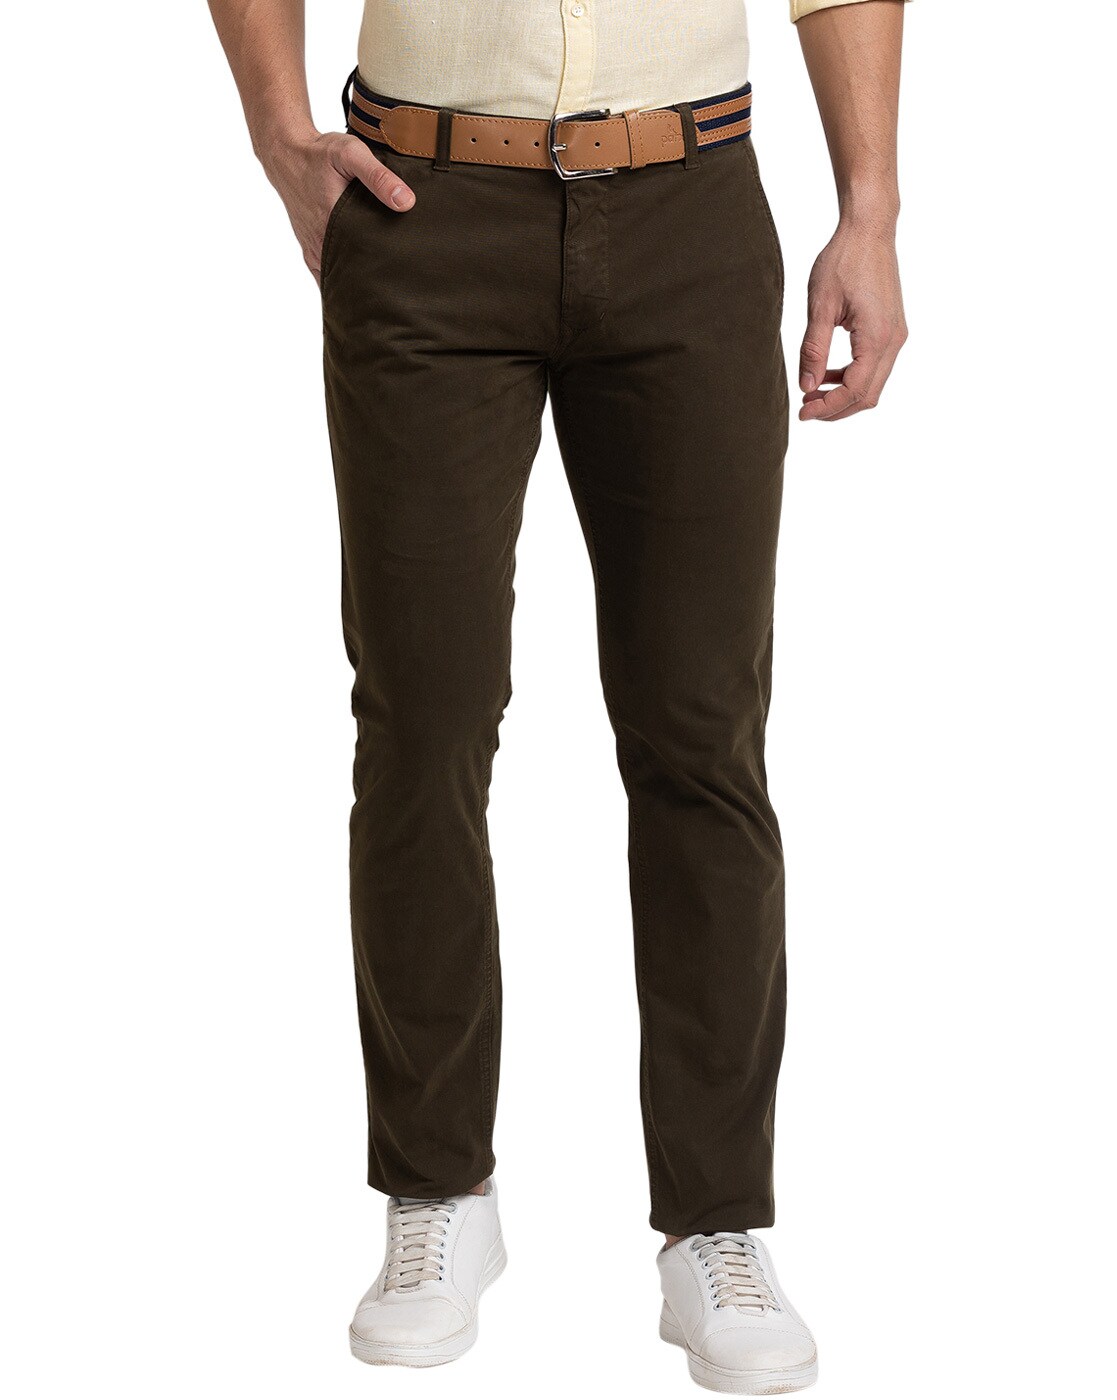 Parx Casual Trousers  Buy Parx Medium Khaki Solid Trousers Online  Nykaa  Fashion